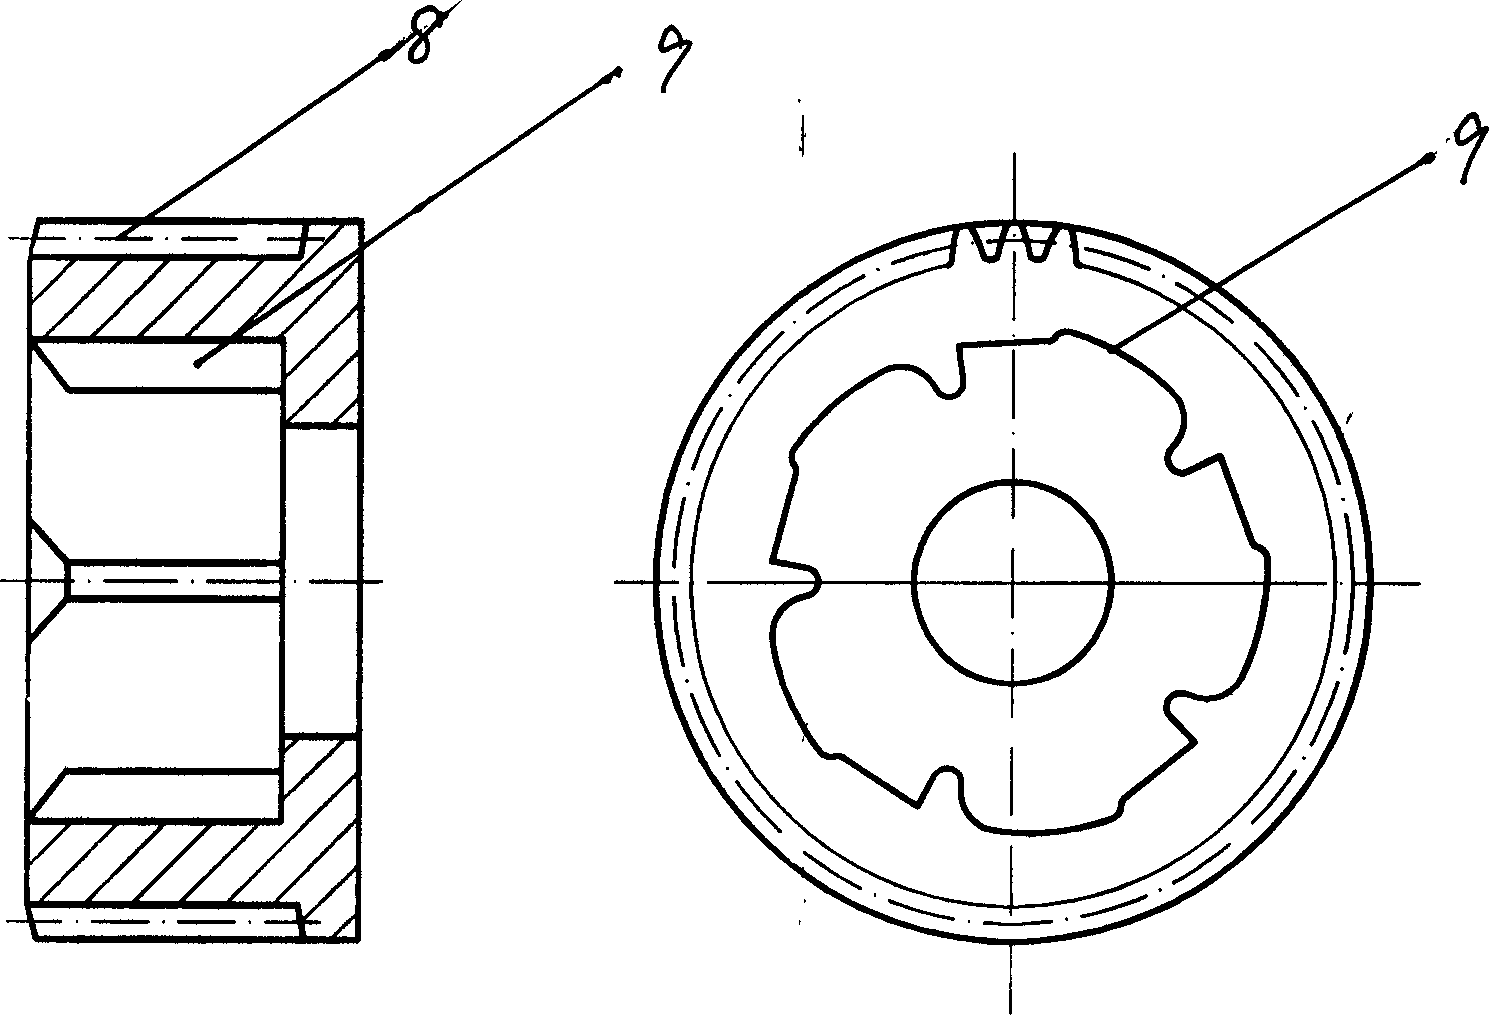 Maching process and mold for annulus of external gear reduced one-way device